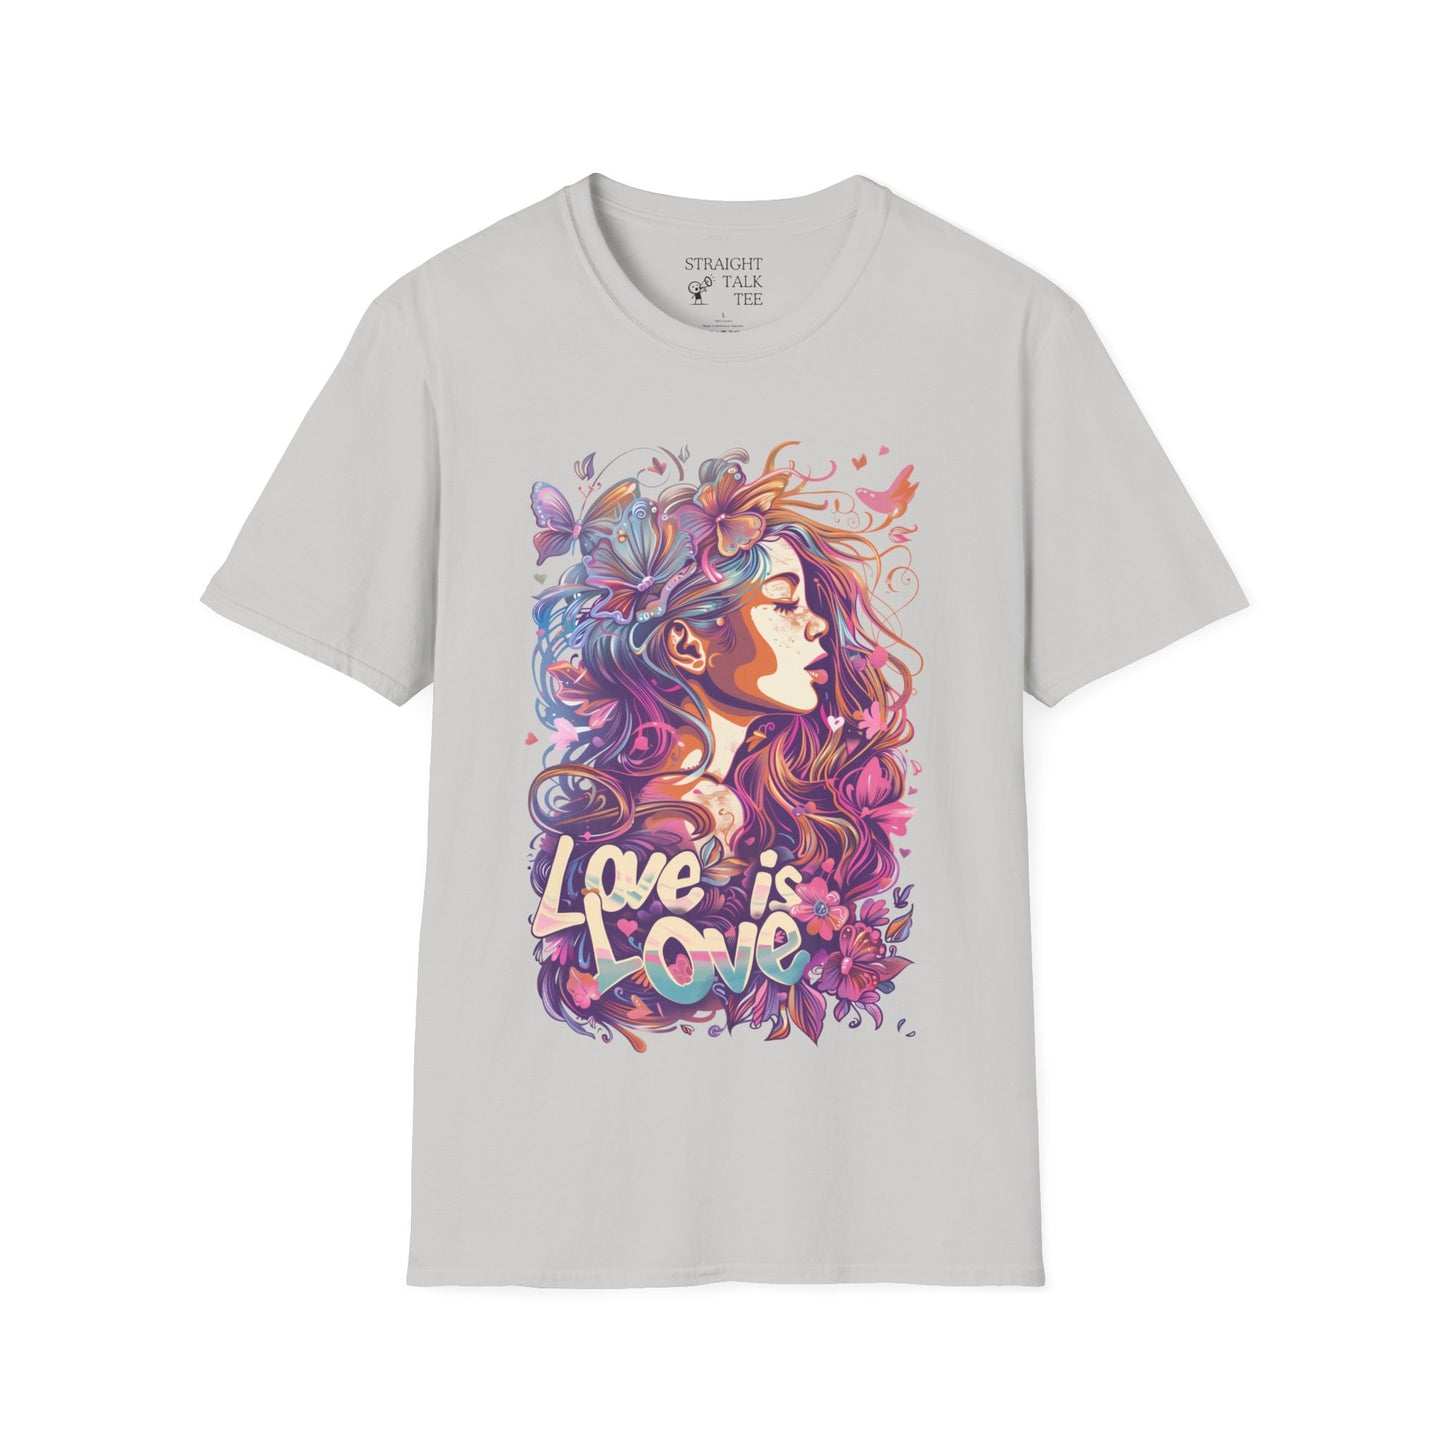 Love is Love T-Shirt | Wear Your Pride Shirt!